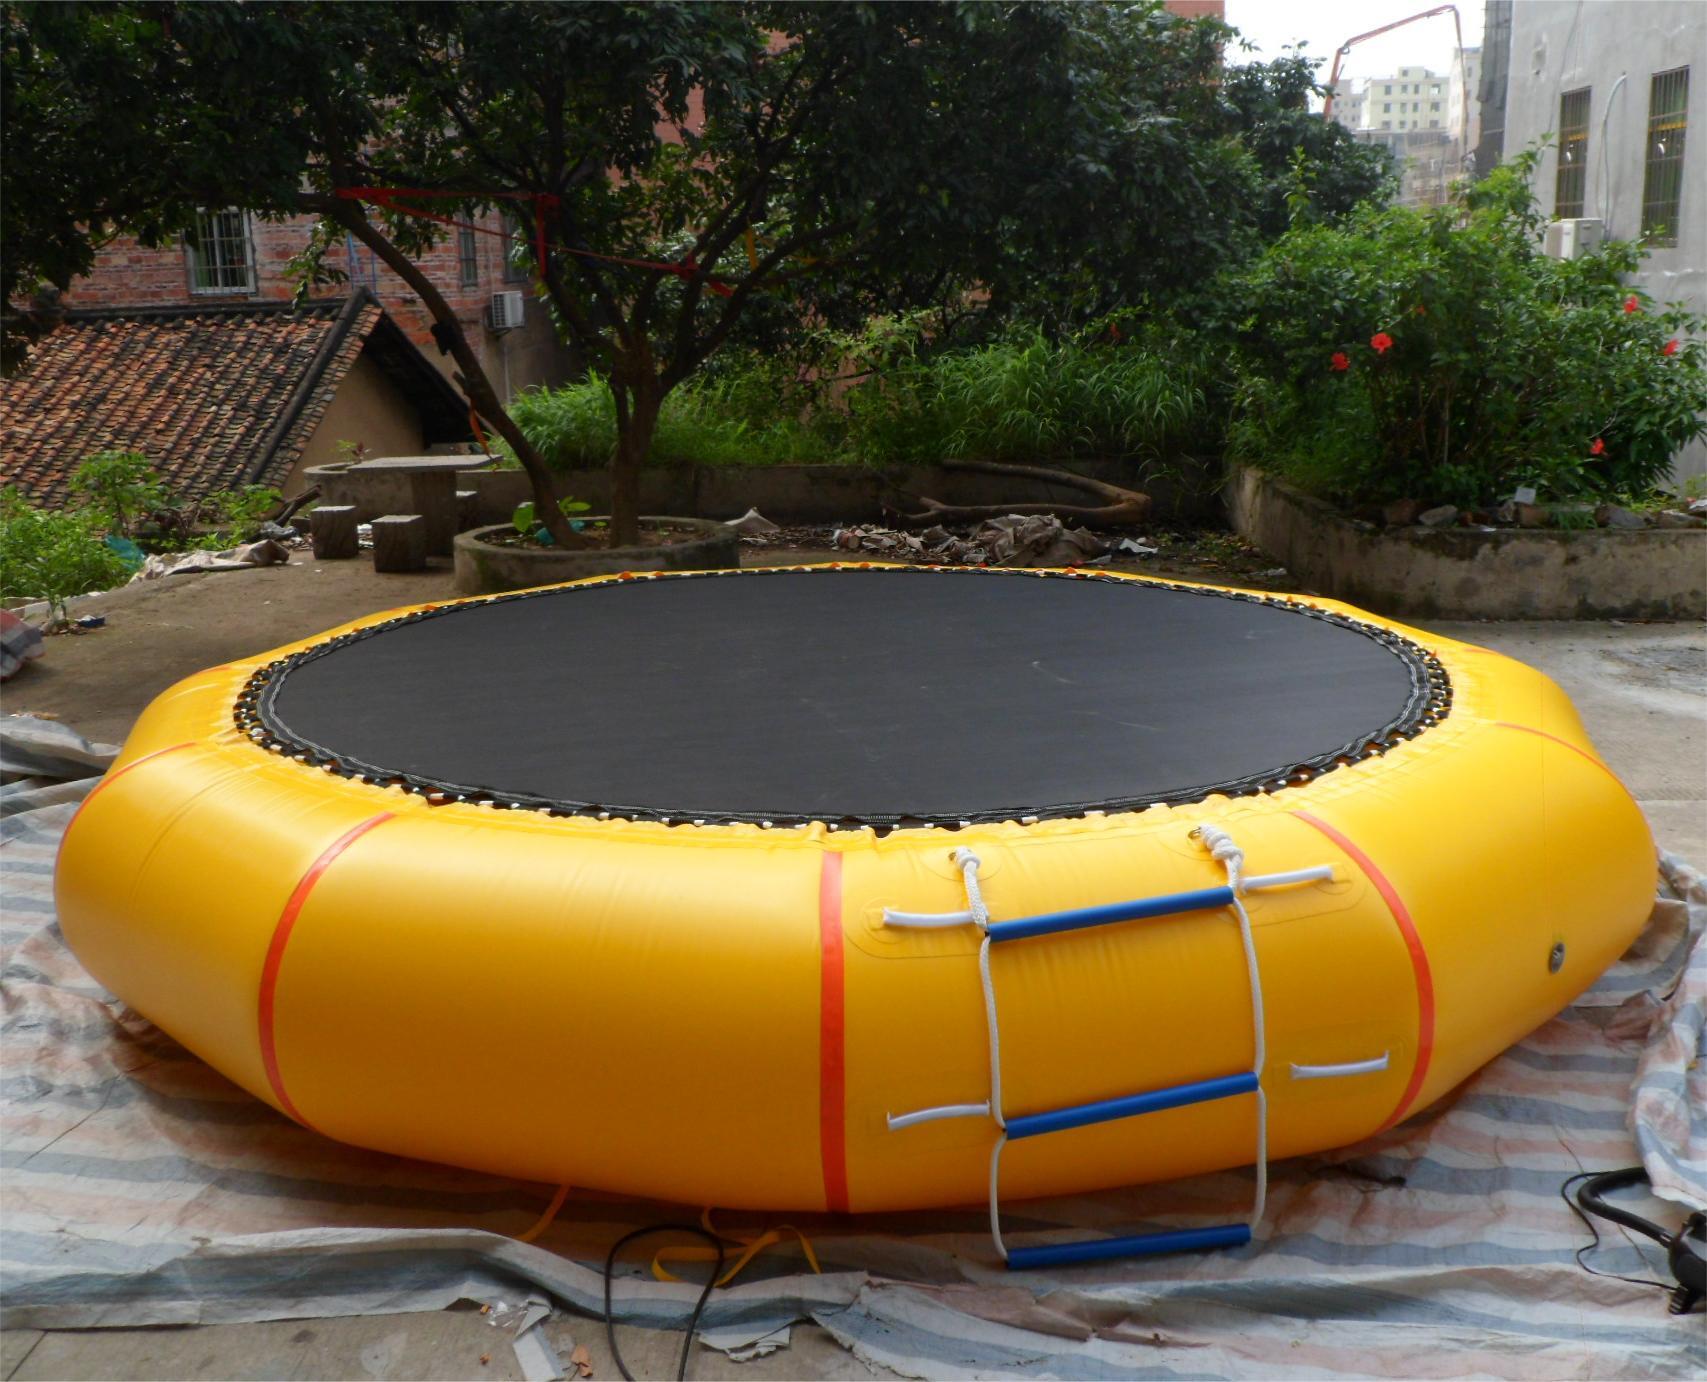 water tranpoline Customized PVC Water Trampoline Inflatable Floating Trampoline Water Trampoline for Water Funworldsport Customized Size Color Logo Wet and Dry Water Trampoline with Slide for Safety Gymnastics water tranpoline,Floating Trampoline Jumping